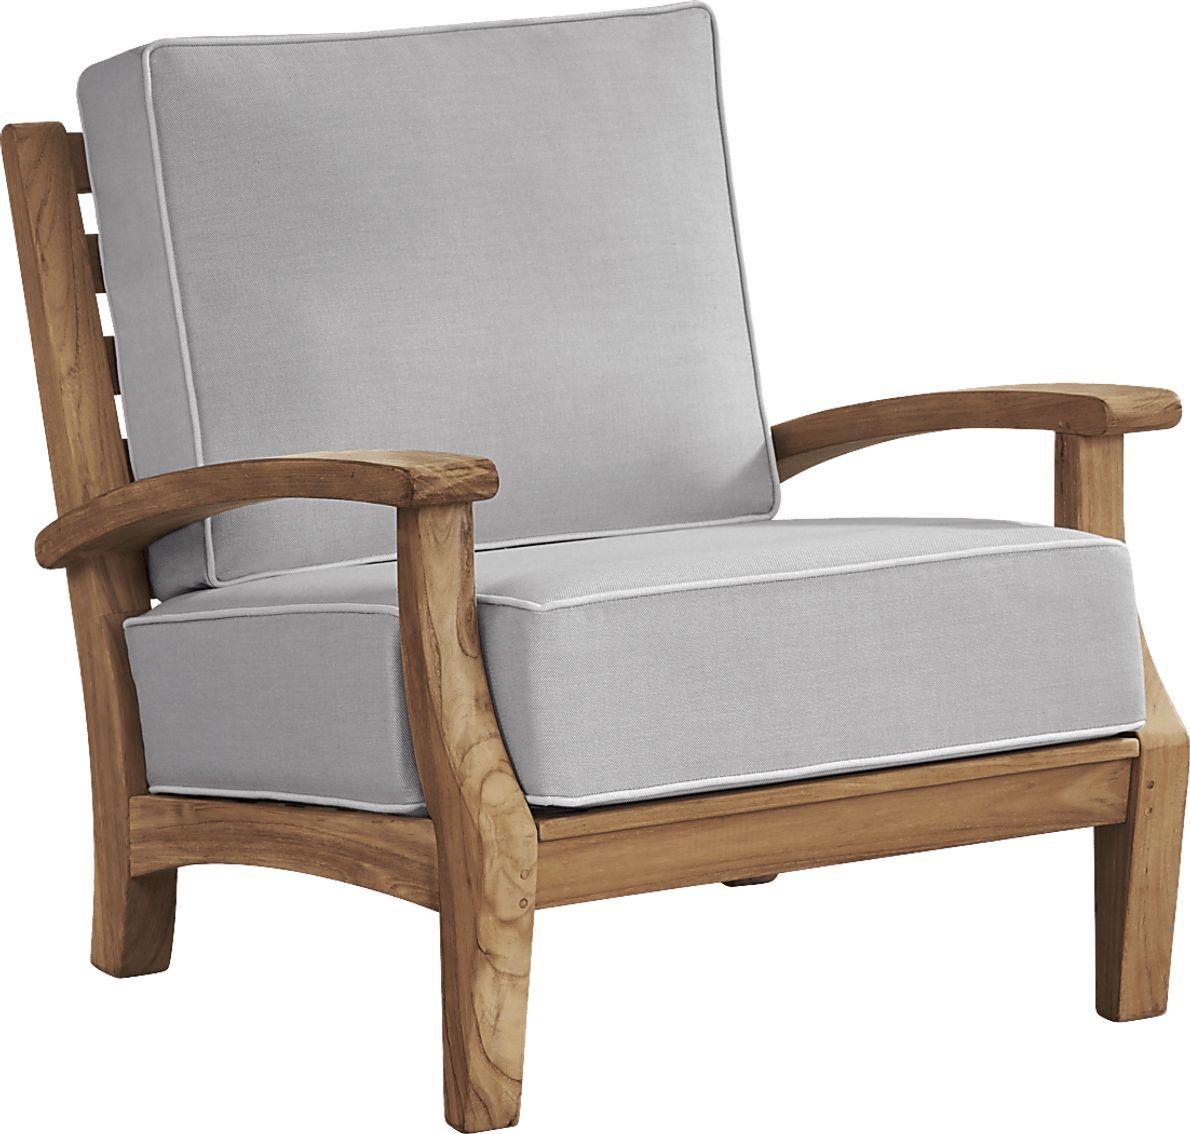 Pleasant Bay Teak Outdoor Chair with Pewter Cushions